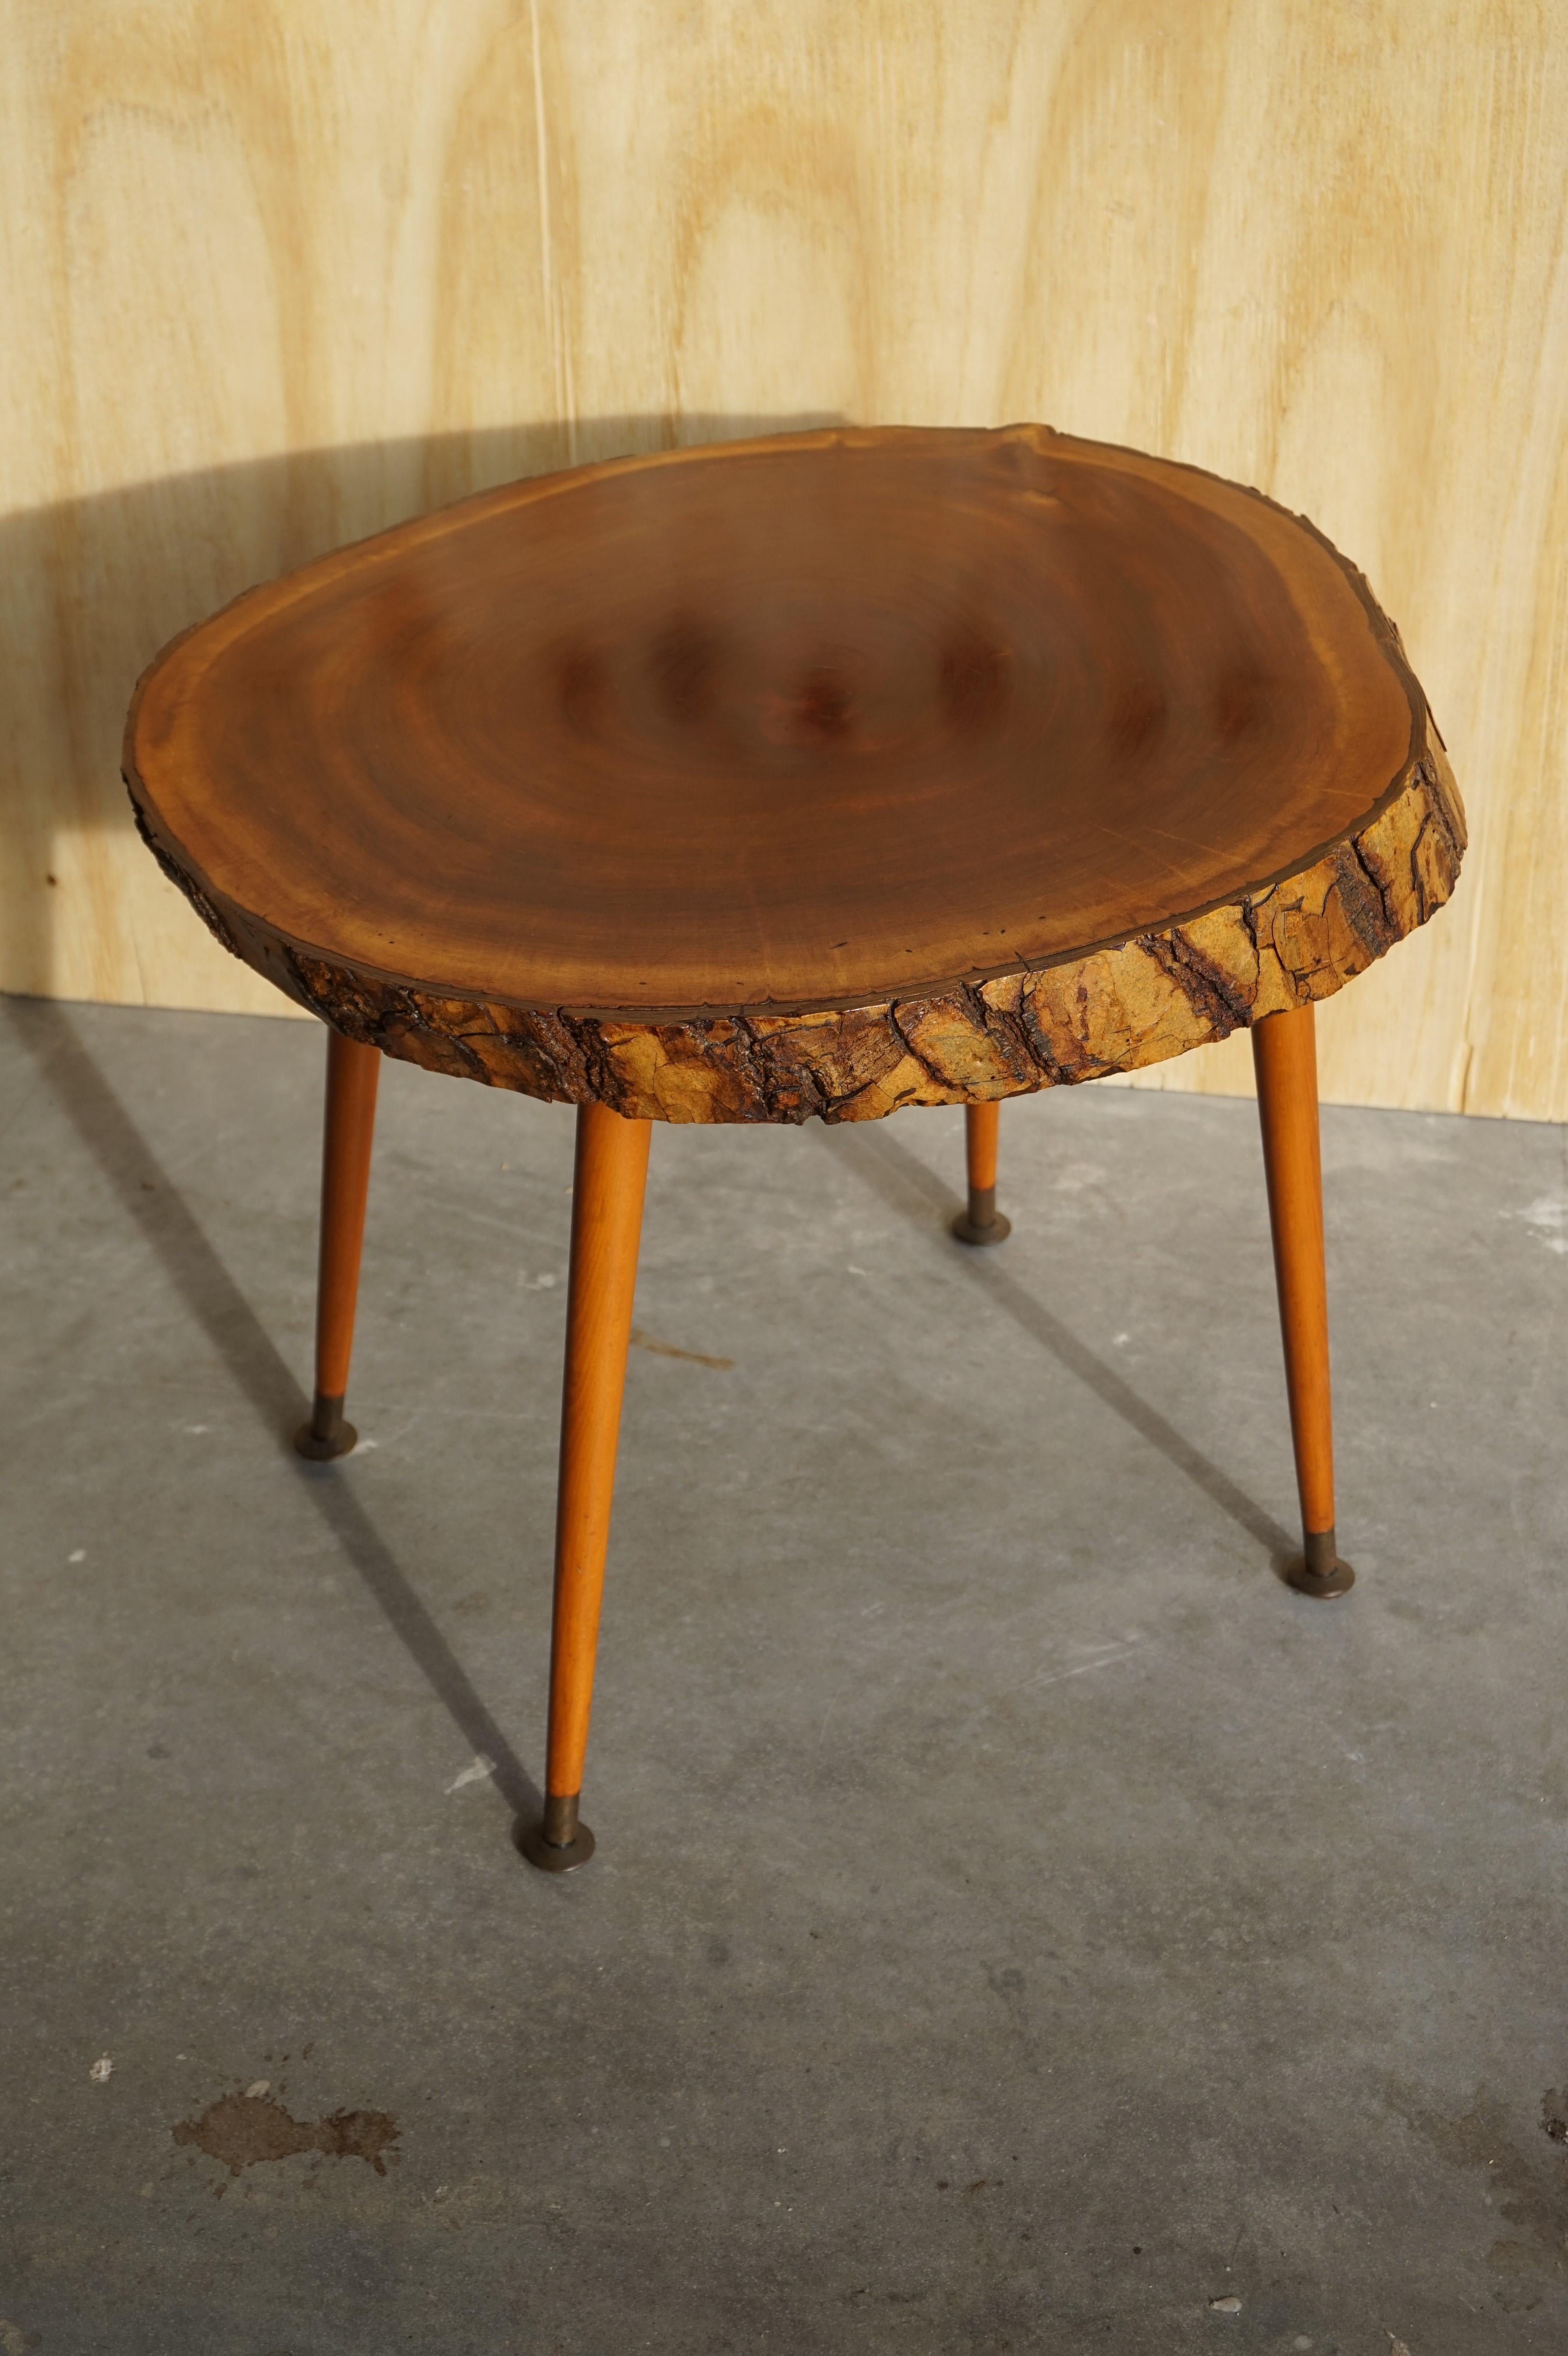 Handcrafted and organically beautiful 1950s table.

This handcrafted table from the midcentury era is both beautiful and functional. The natural material tabletop is made of a stunning slice of timber and it even comes with the original bark. The